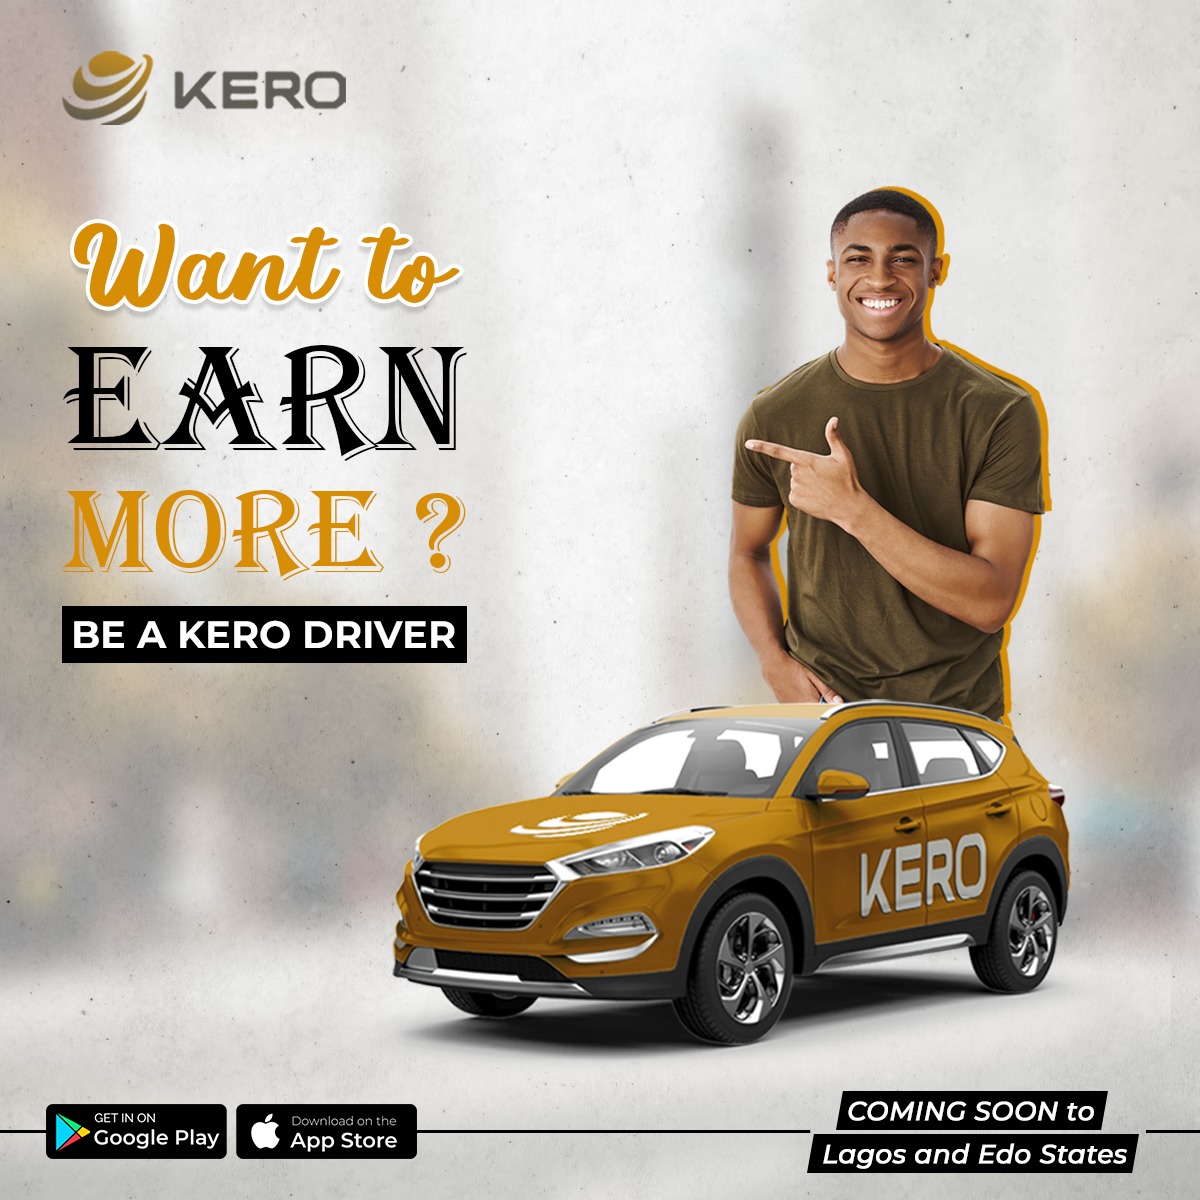 Make more money with flexible hours as a Kero driver! Join our team now and start earning on your own term. Drive towards financial freedom today! #kero #Driver #HIRINGNOW #Job #JobSeekers #African #NigerianElections2023 #Nigeria #Lagos